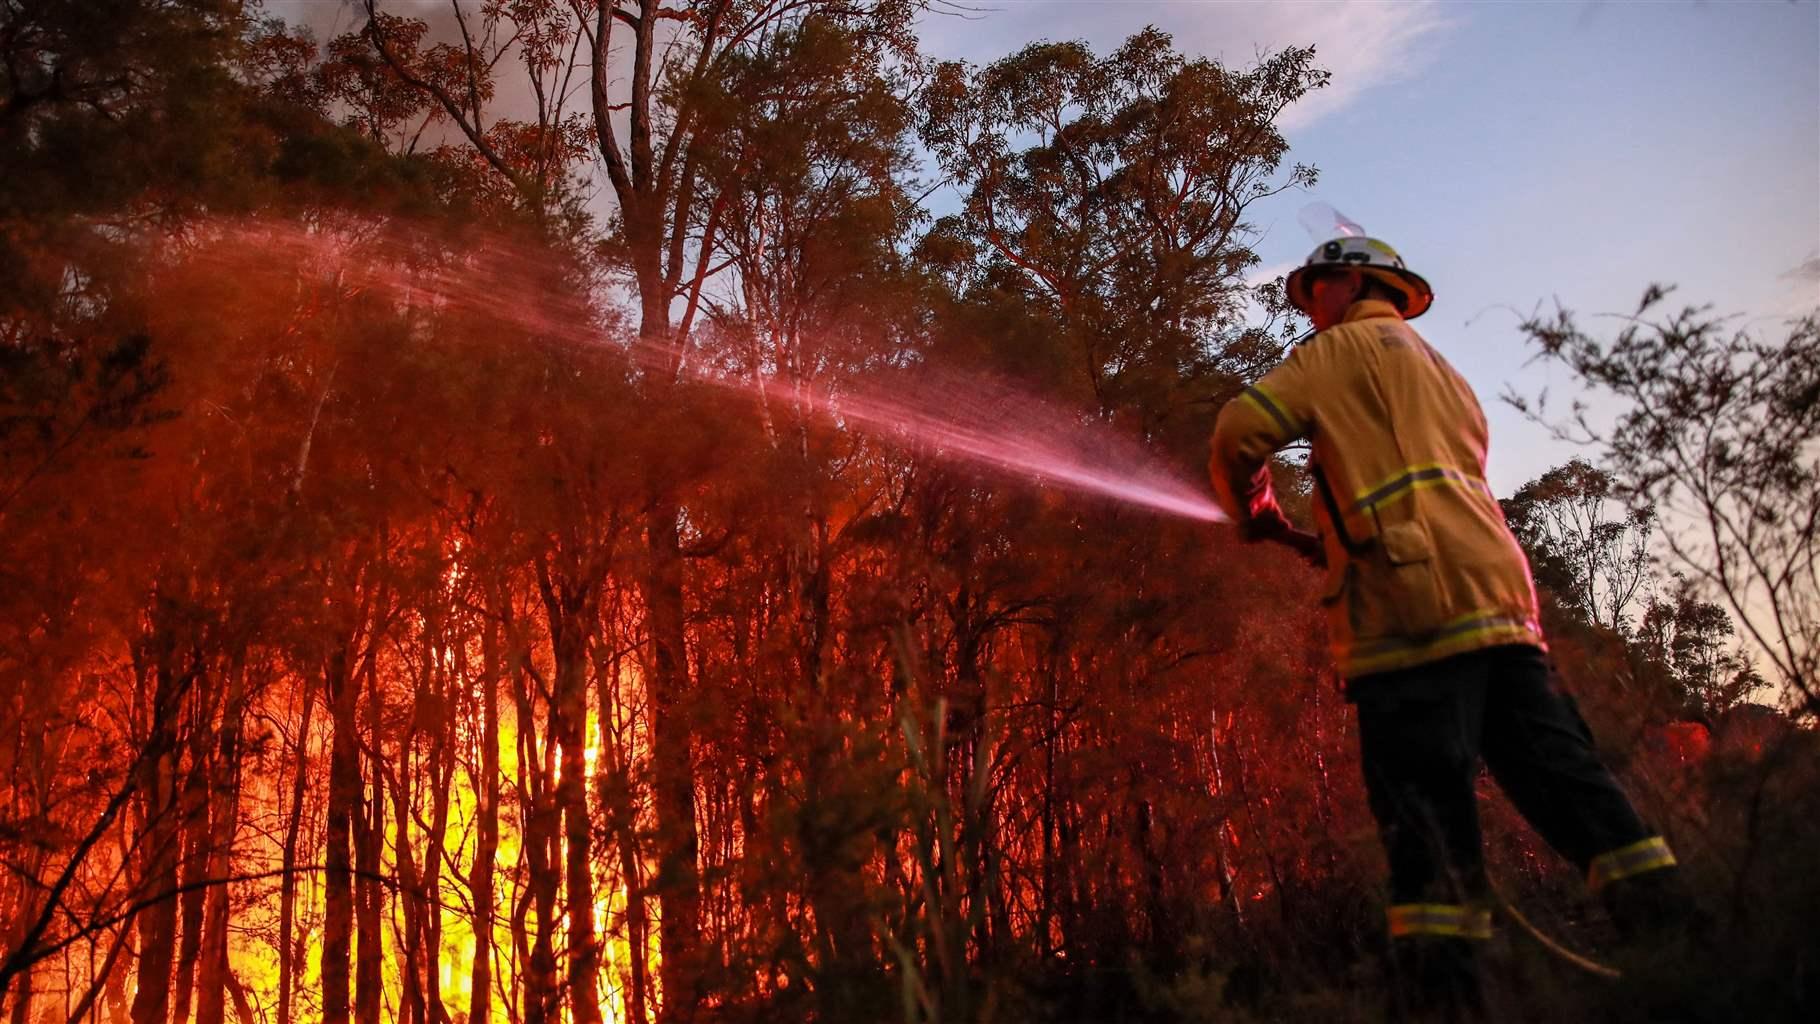 A firefighter holds a hose blasting water toward trees engulfed in flames.